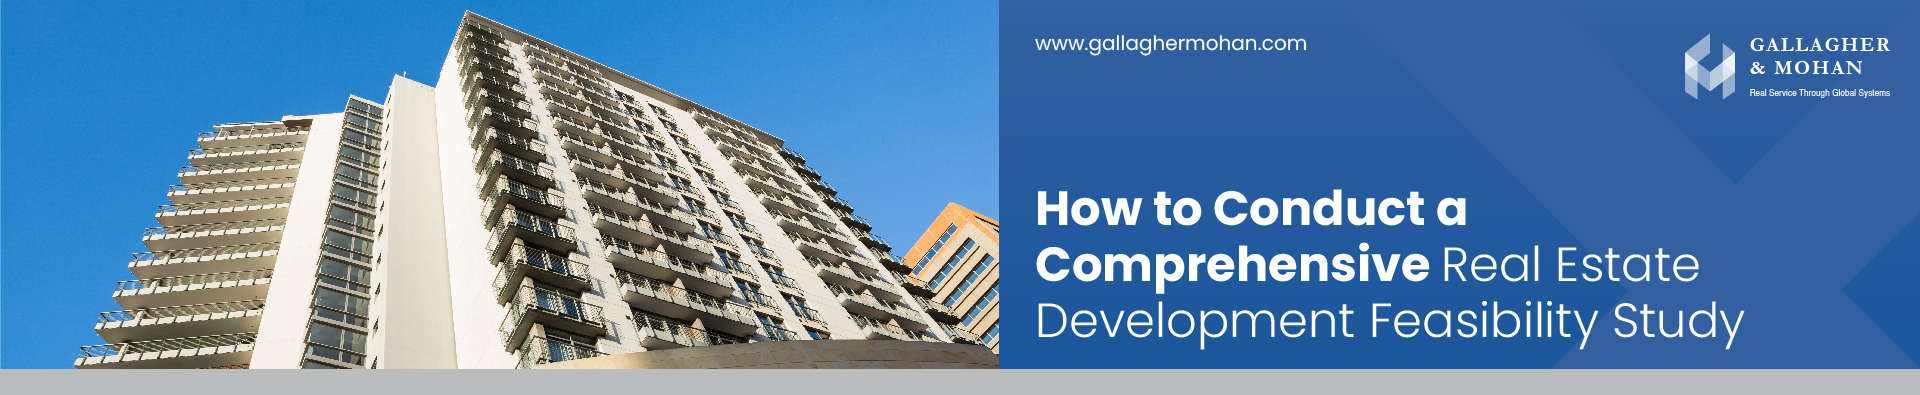 How To Conduct A Comprehensive Real Estate Development Feasibility Study